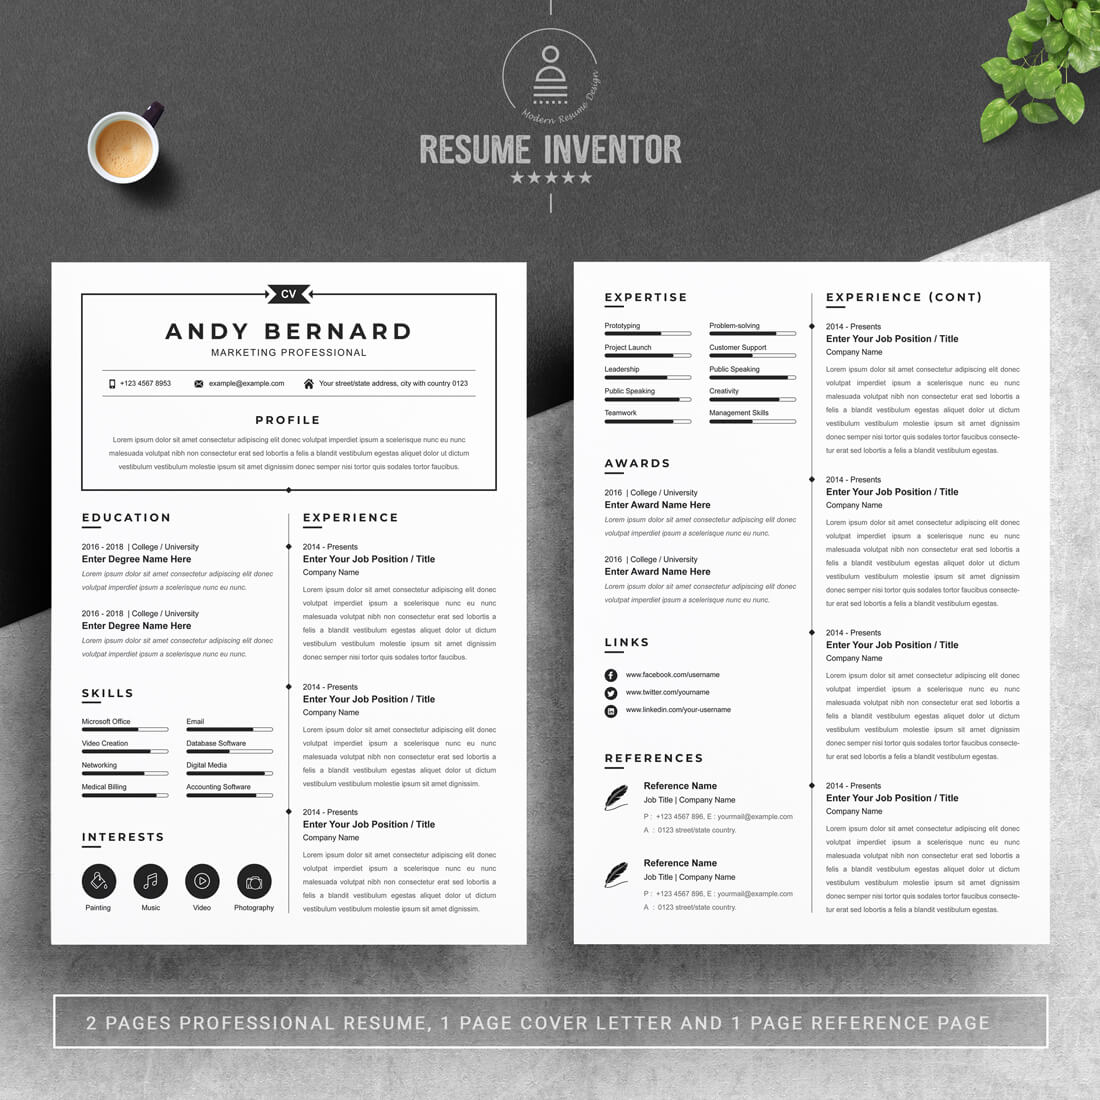 Marketing Professional Resume Template cover image.